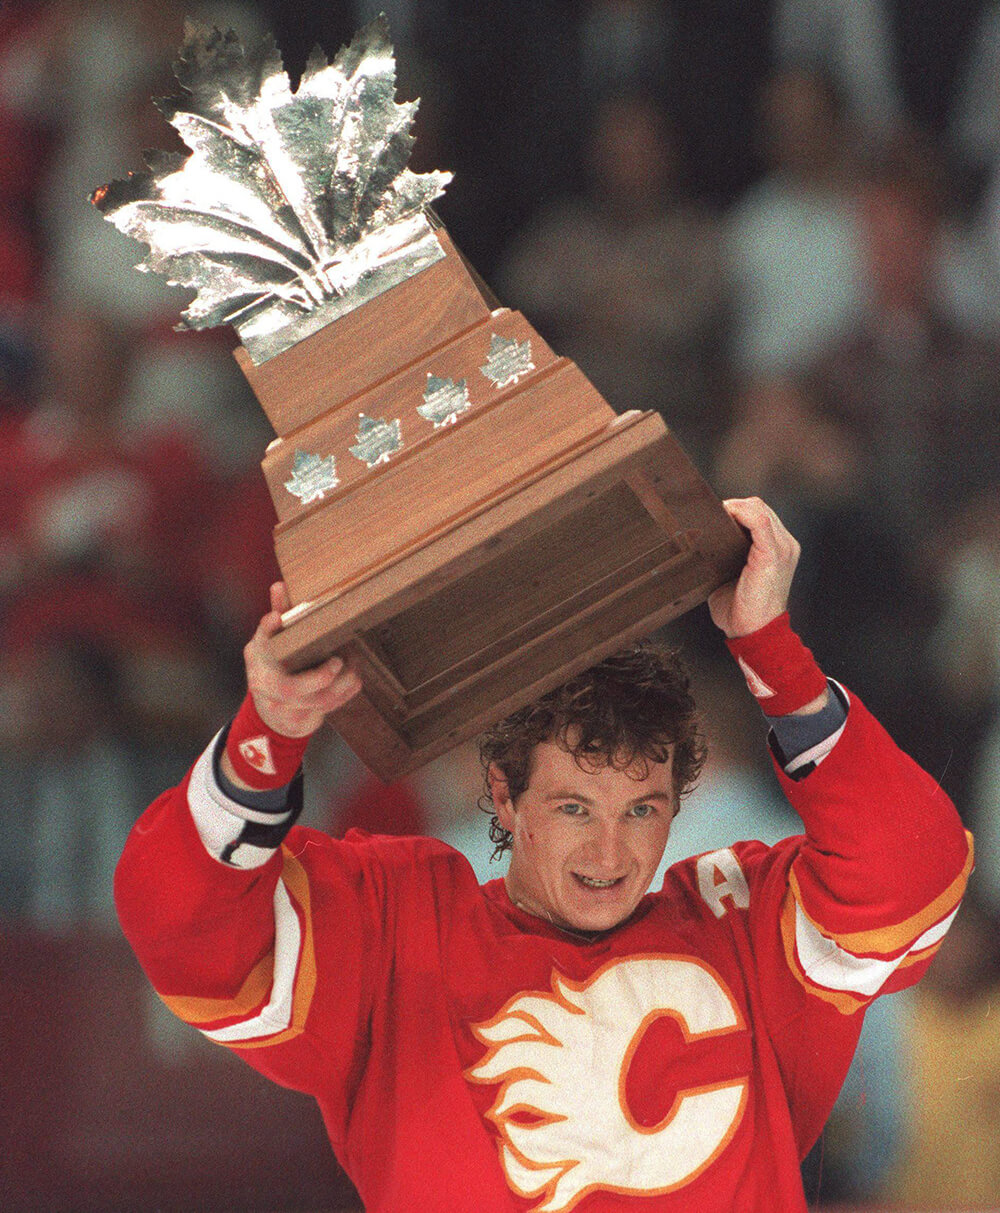 Remembering the Calgary Flames' 1989 Stanley Cup run